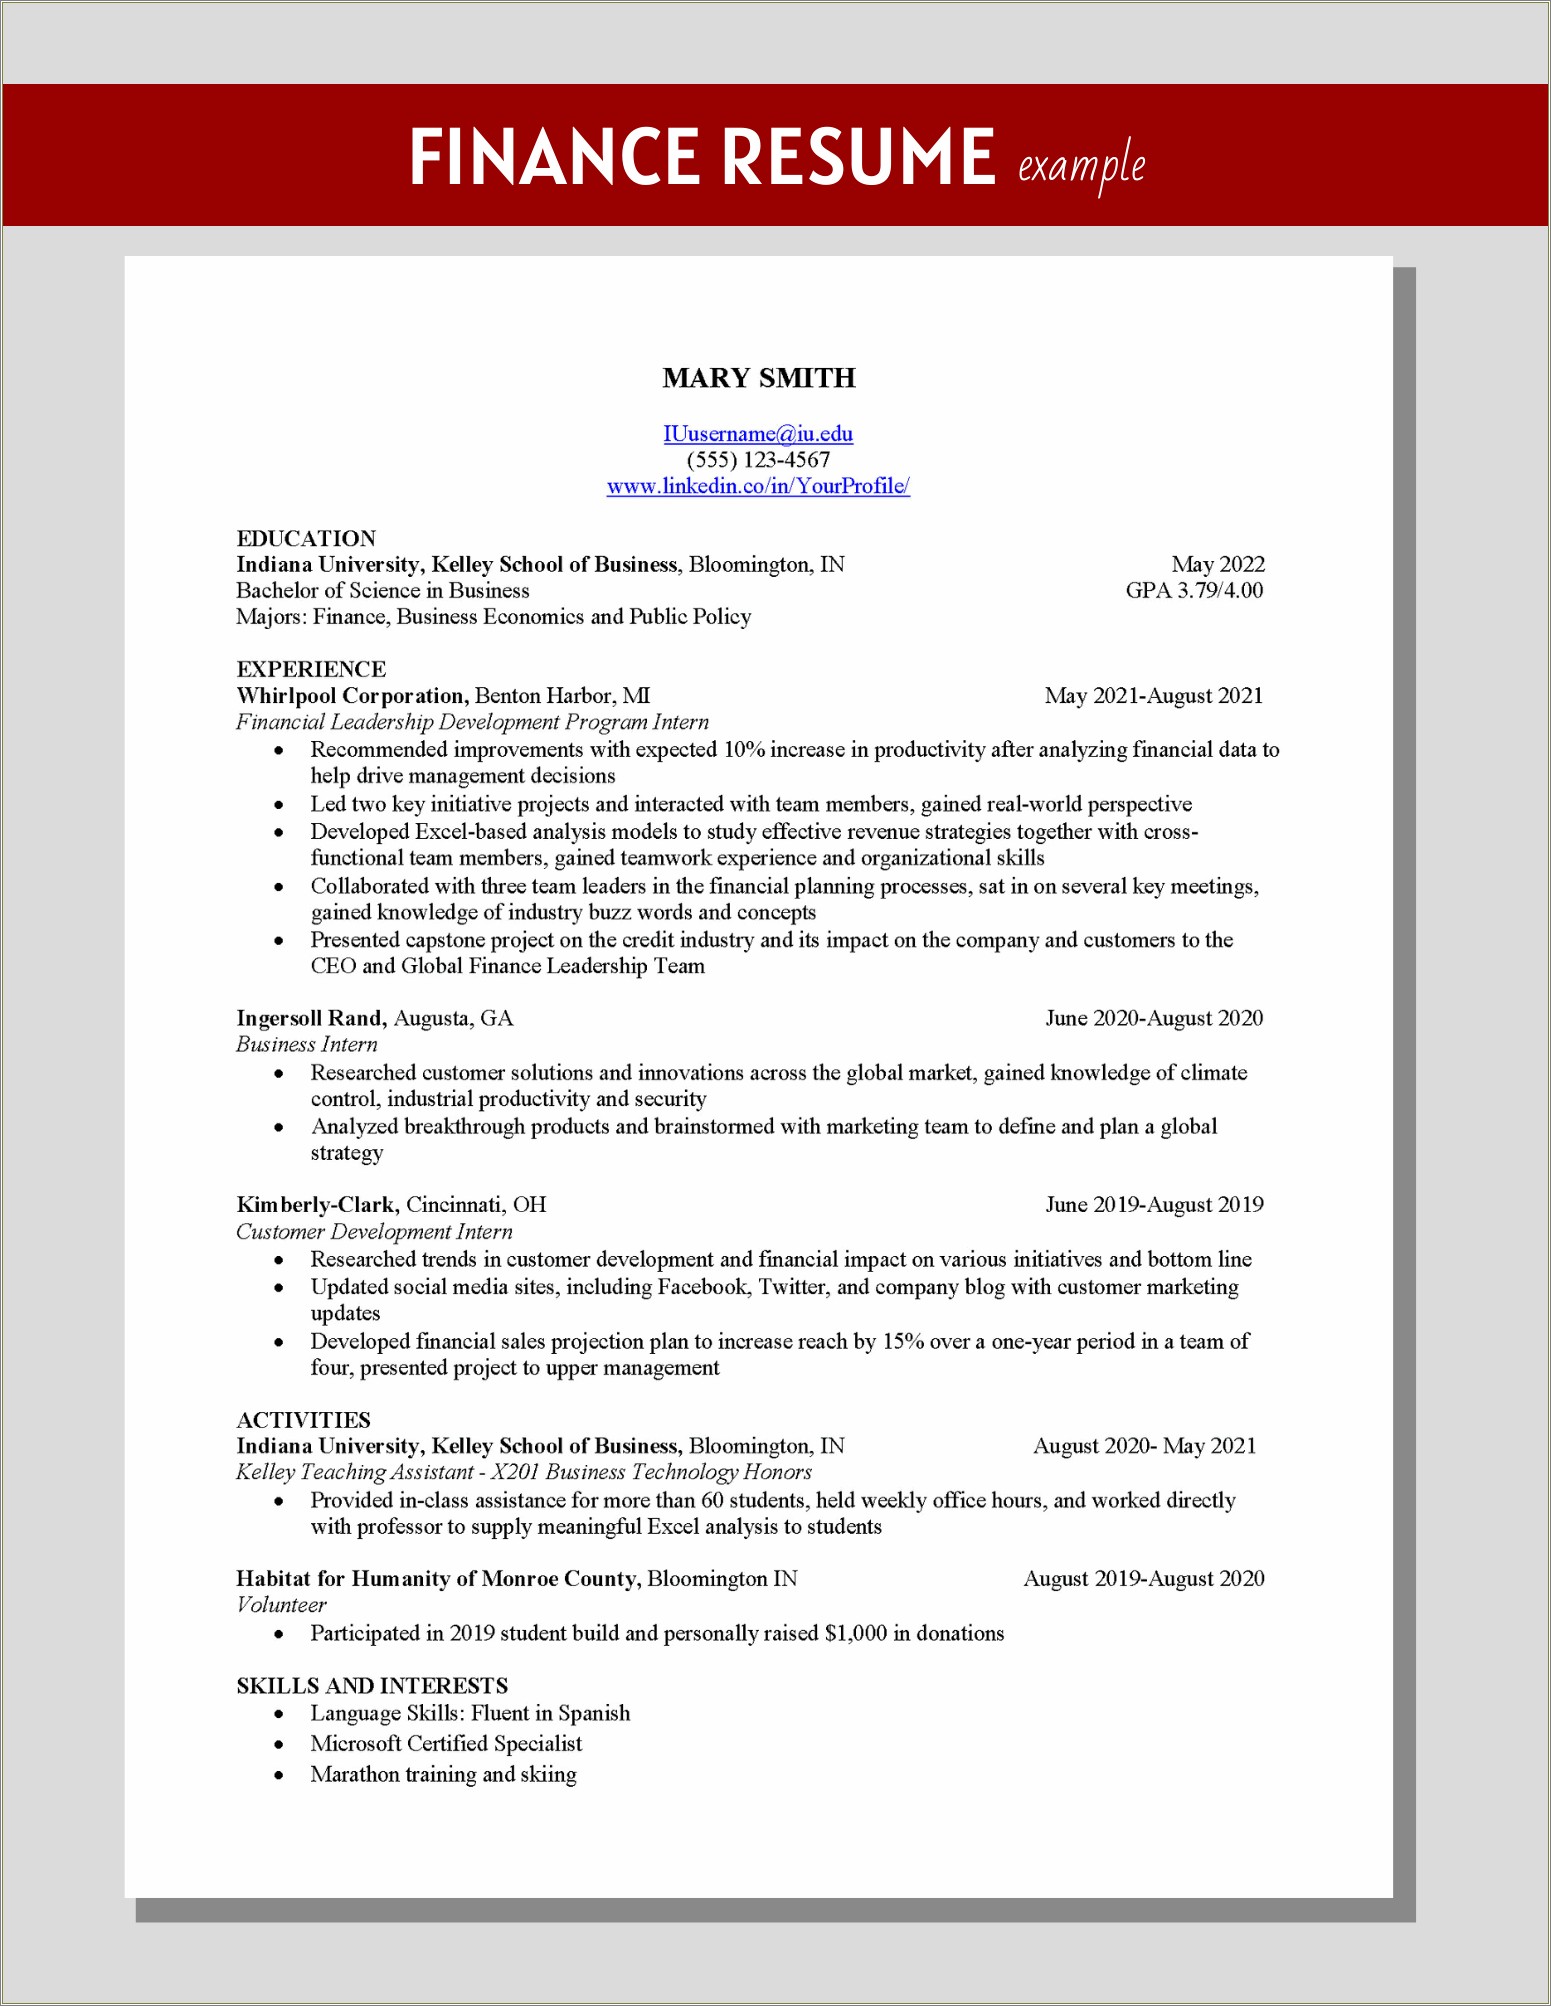 Resume For One Job Of 15 Years